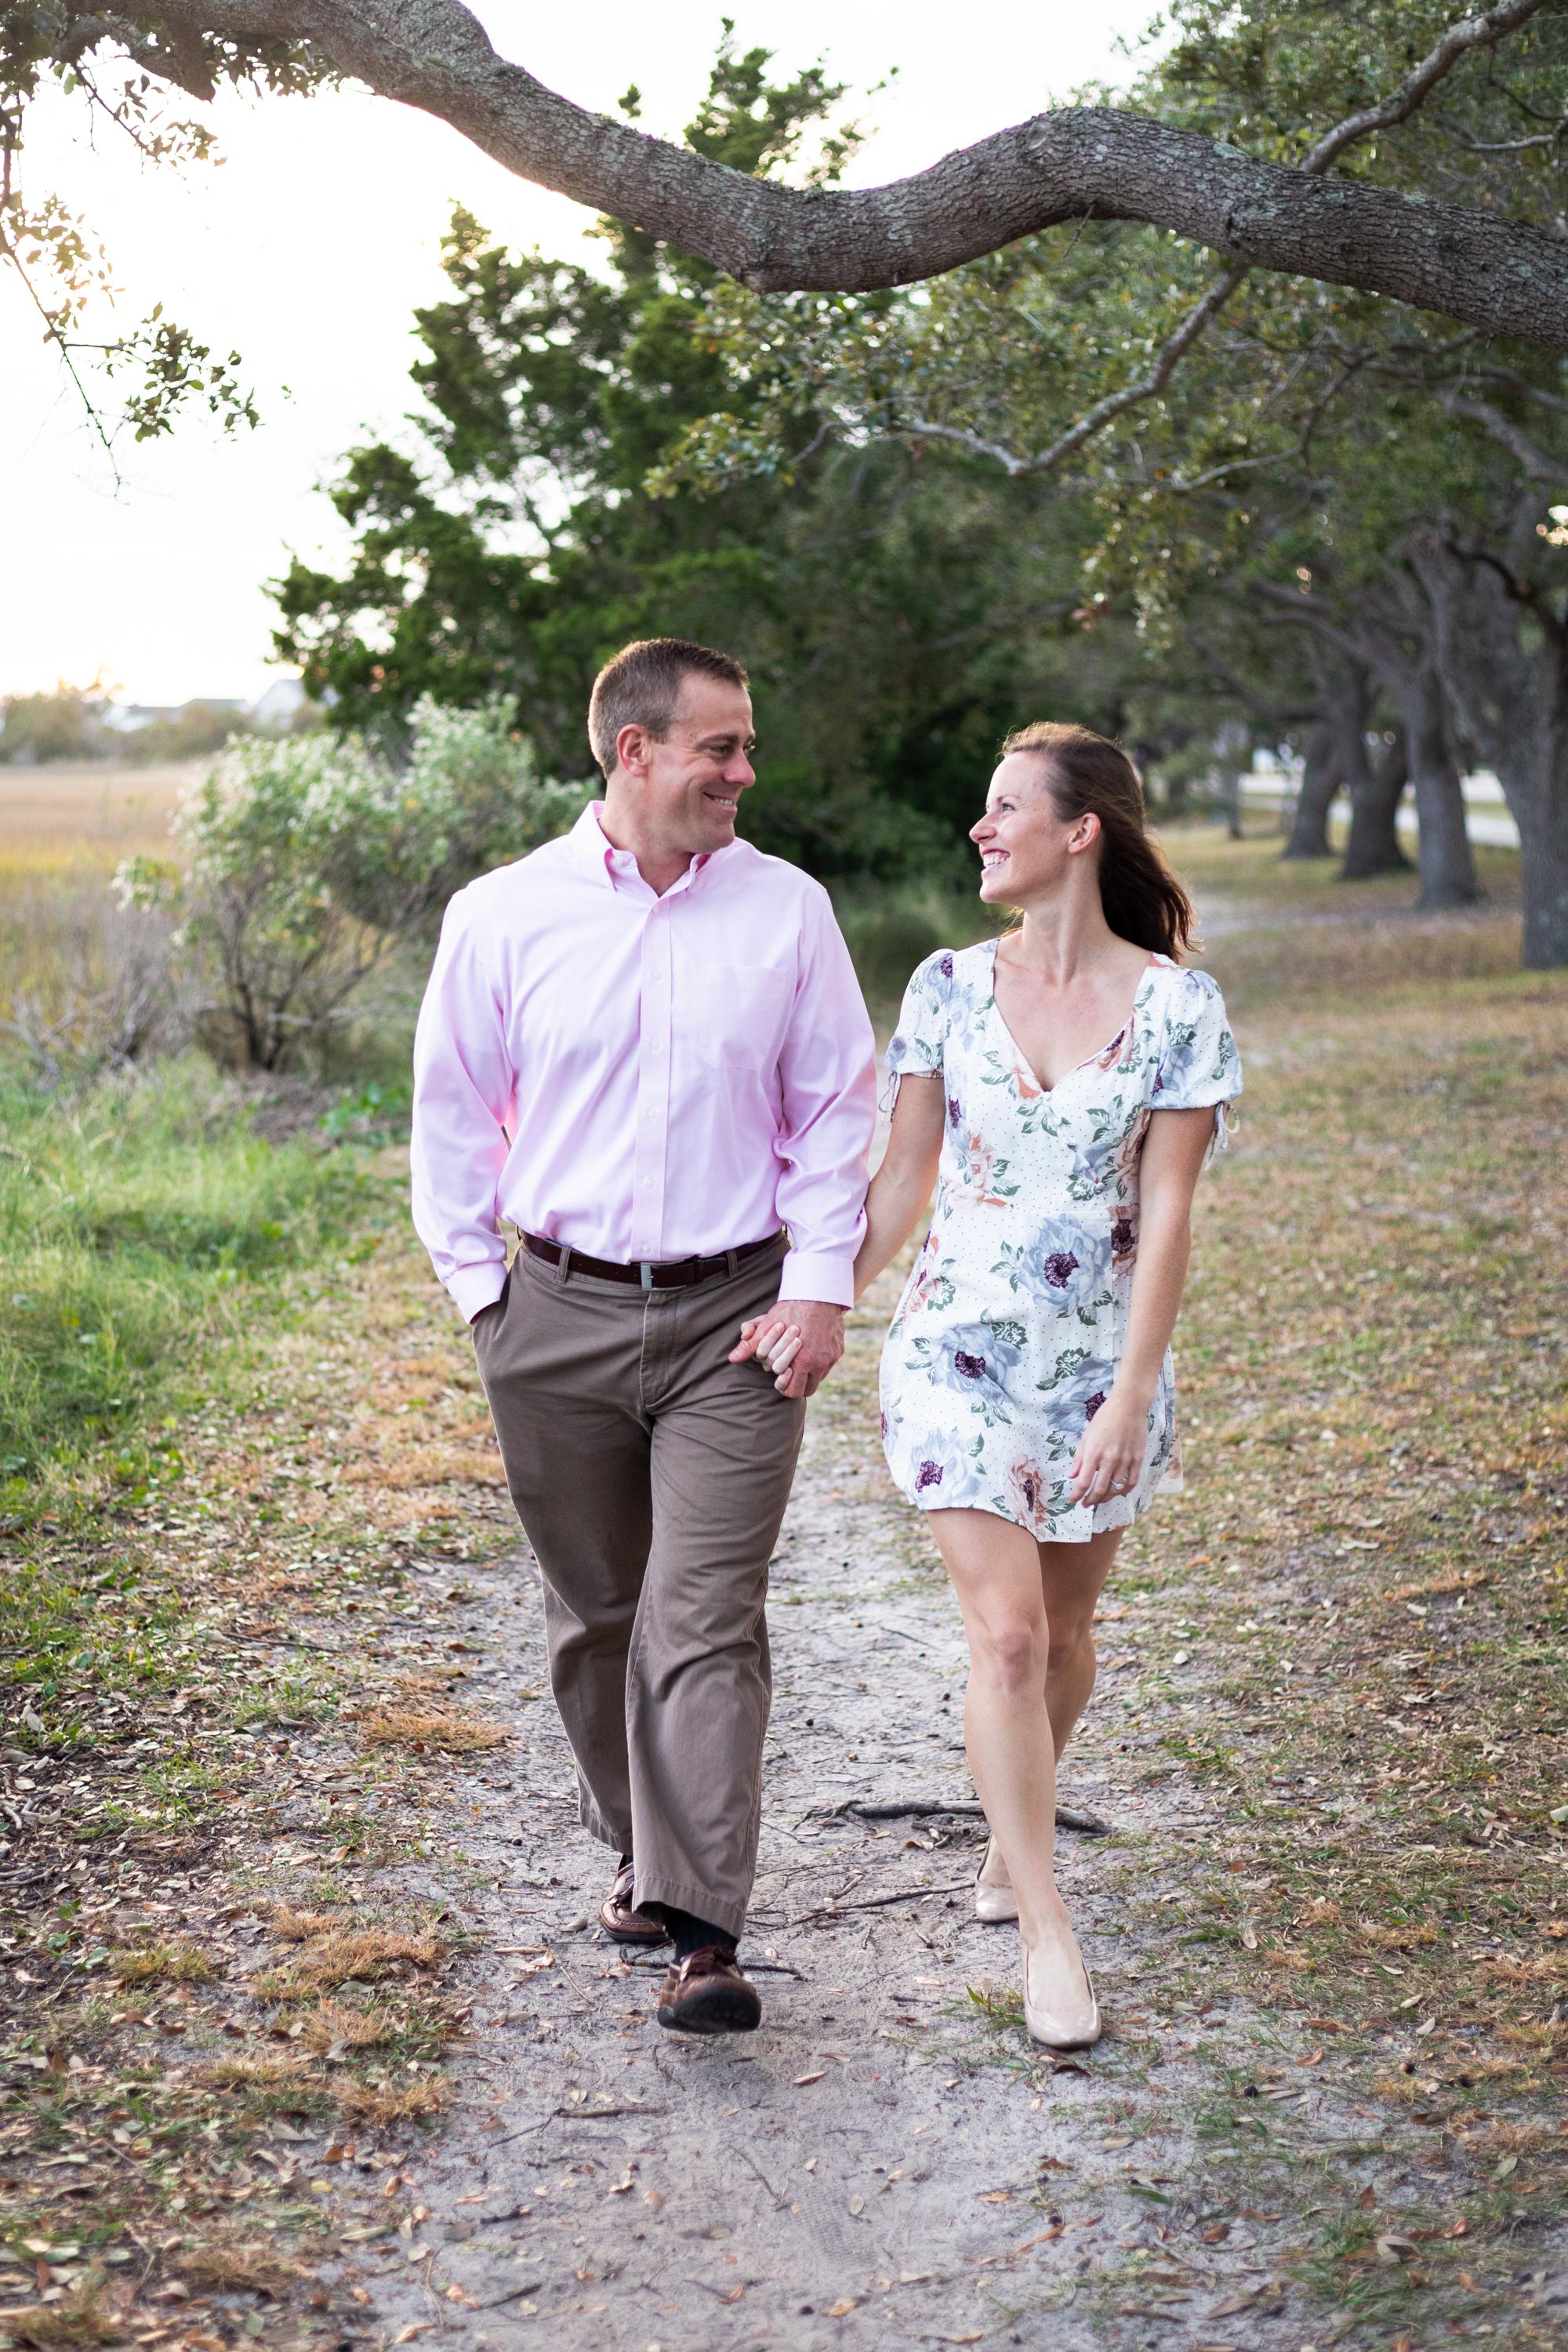 The Wedding Website of Kaitlyn Conger and Charles Lockhart